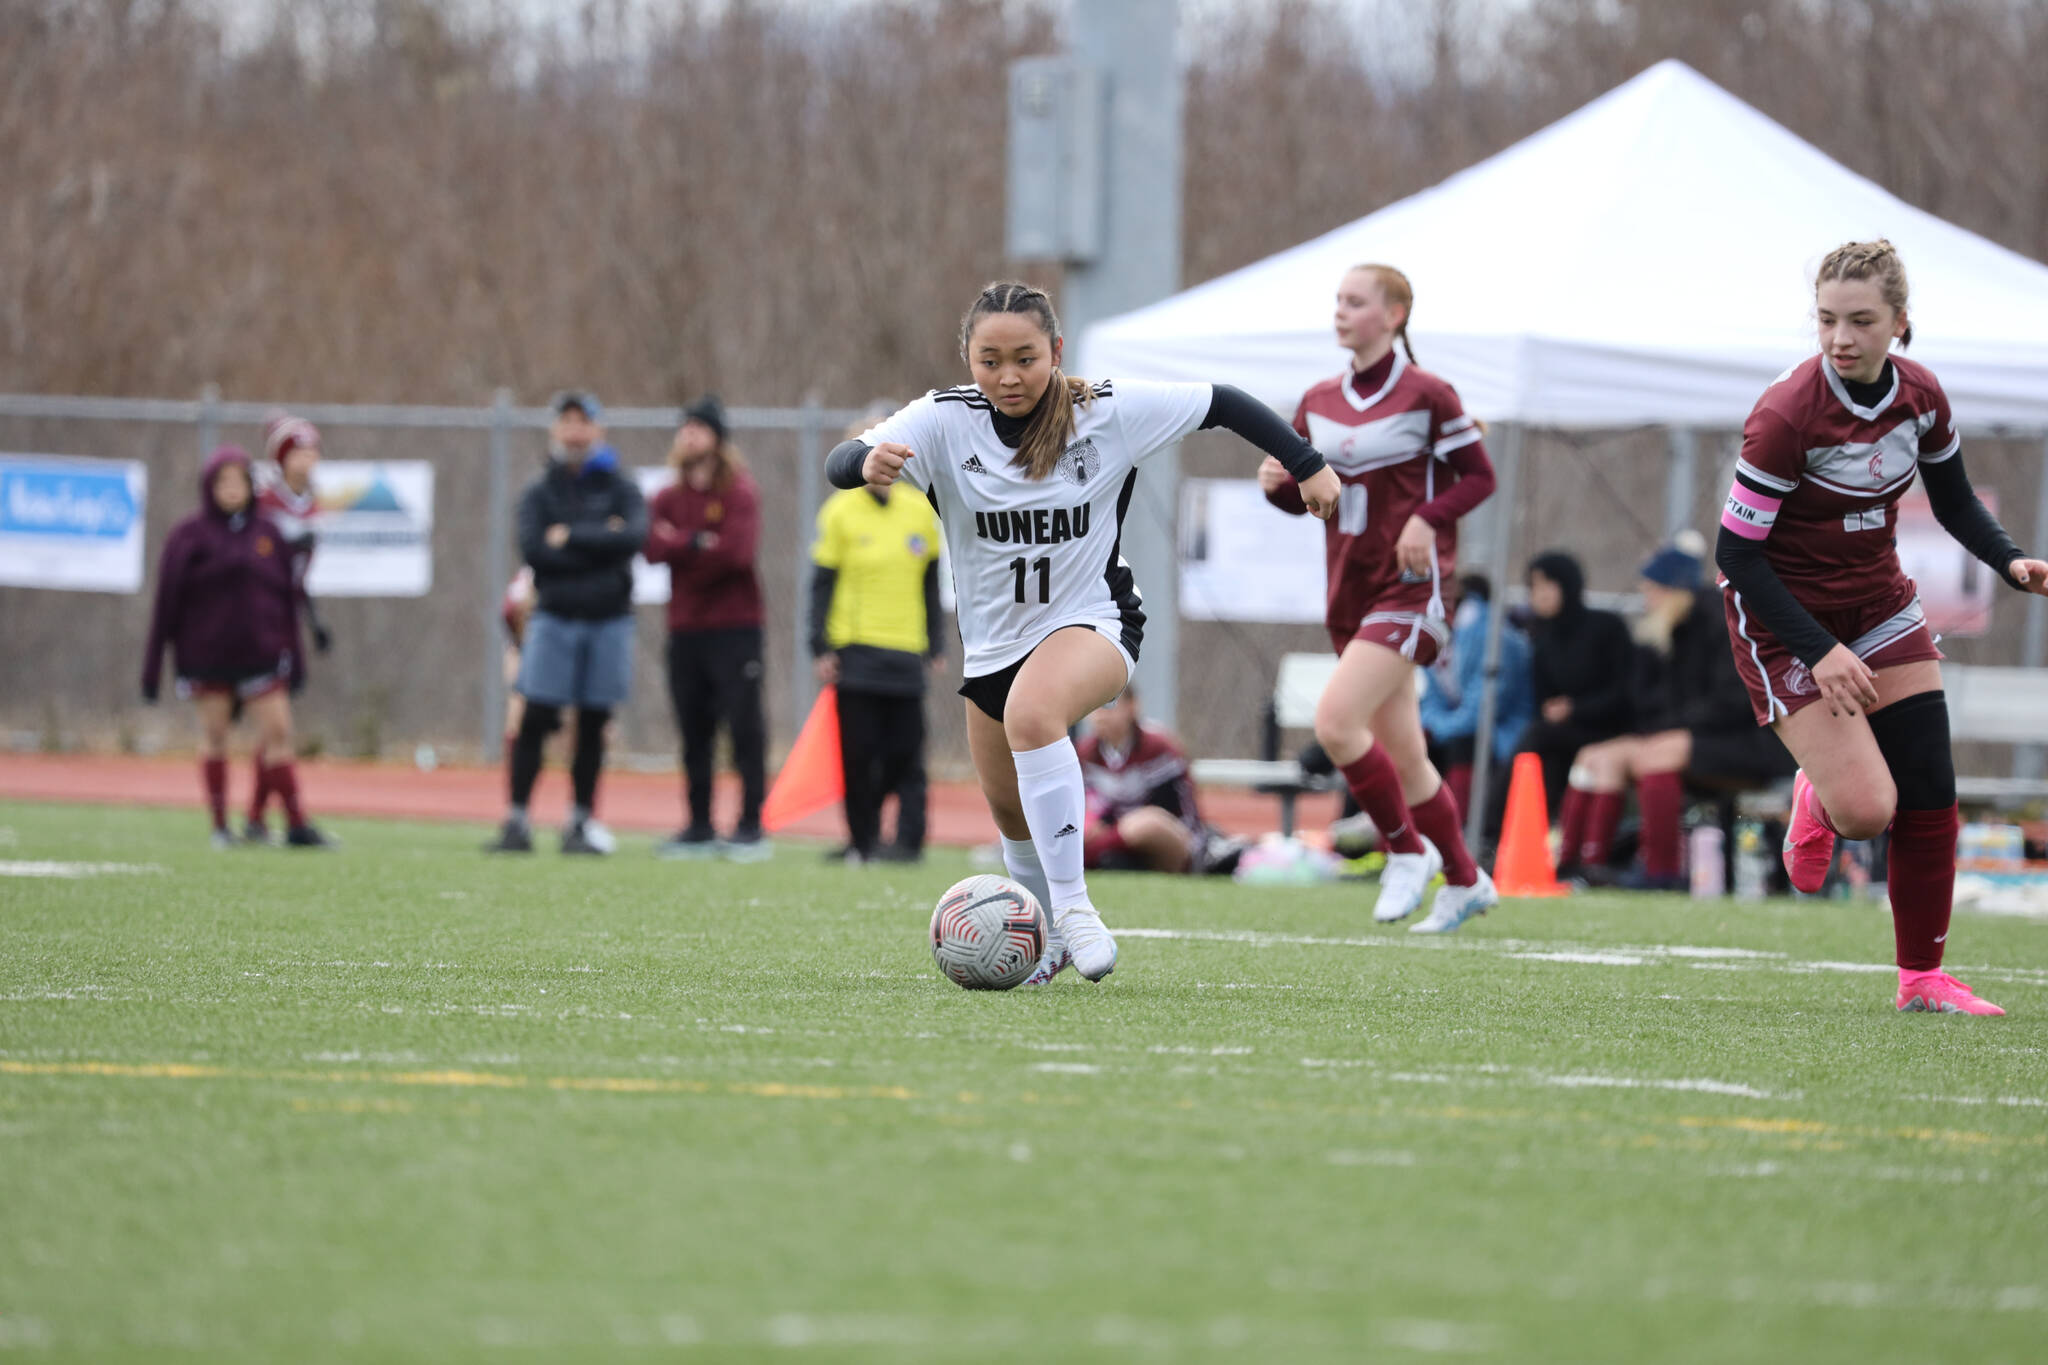 JDHS sophomore midfielder/forward Milina Mazon sprints past two Ketchikan players during a Saturday afternoon game against the team at Thunder Mountain High School. (Clarise Larson / Juneau Empire)